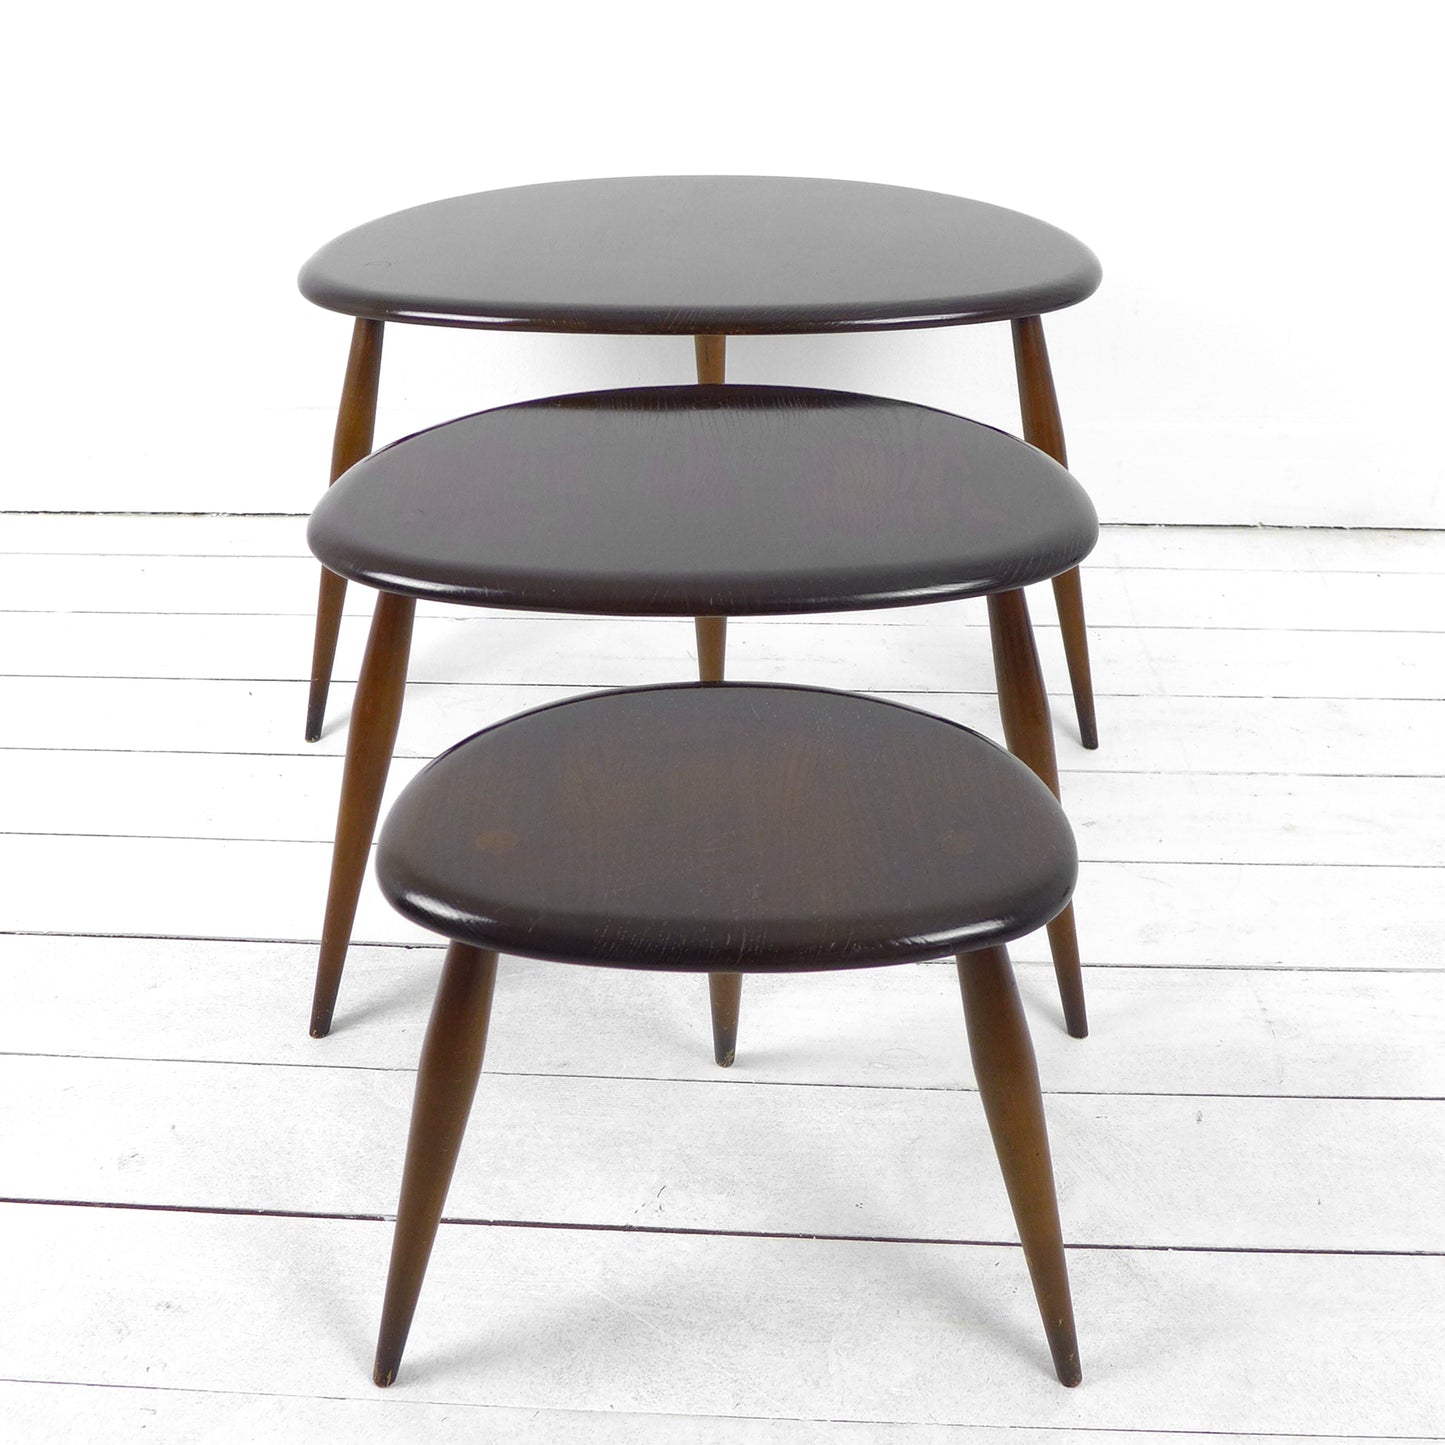 Vintage Ercol Pebble Tables - Nest of 3 in Dark Tone